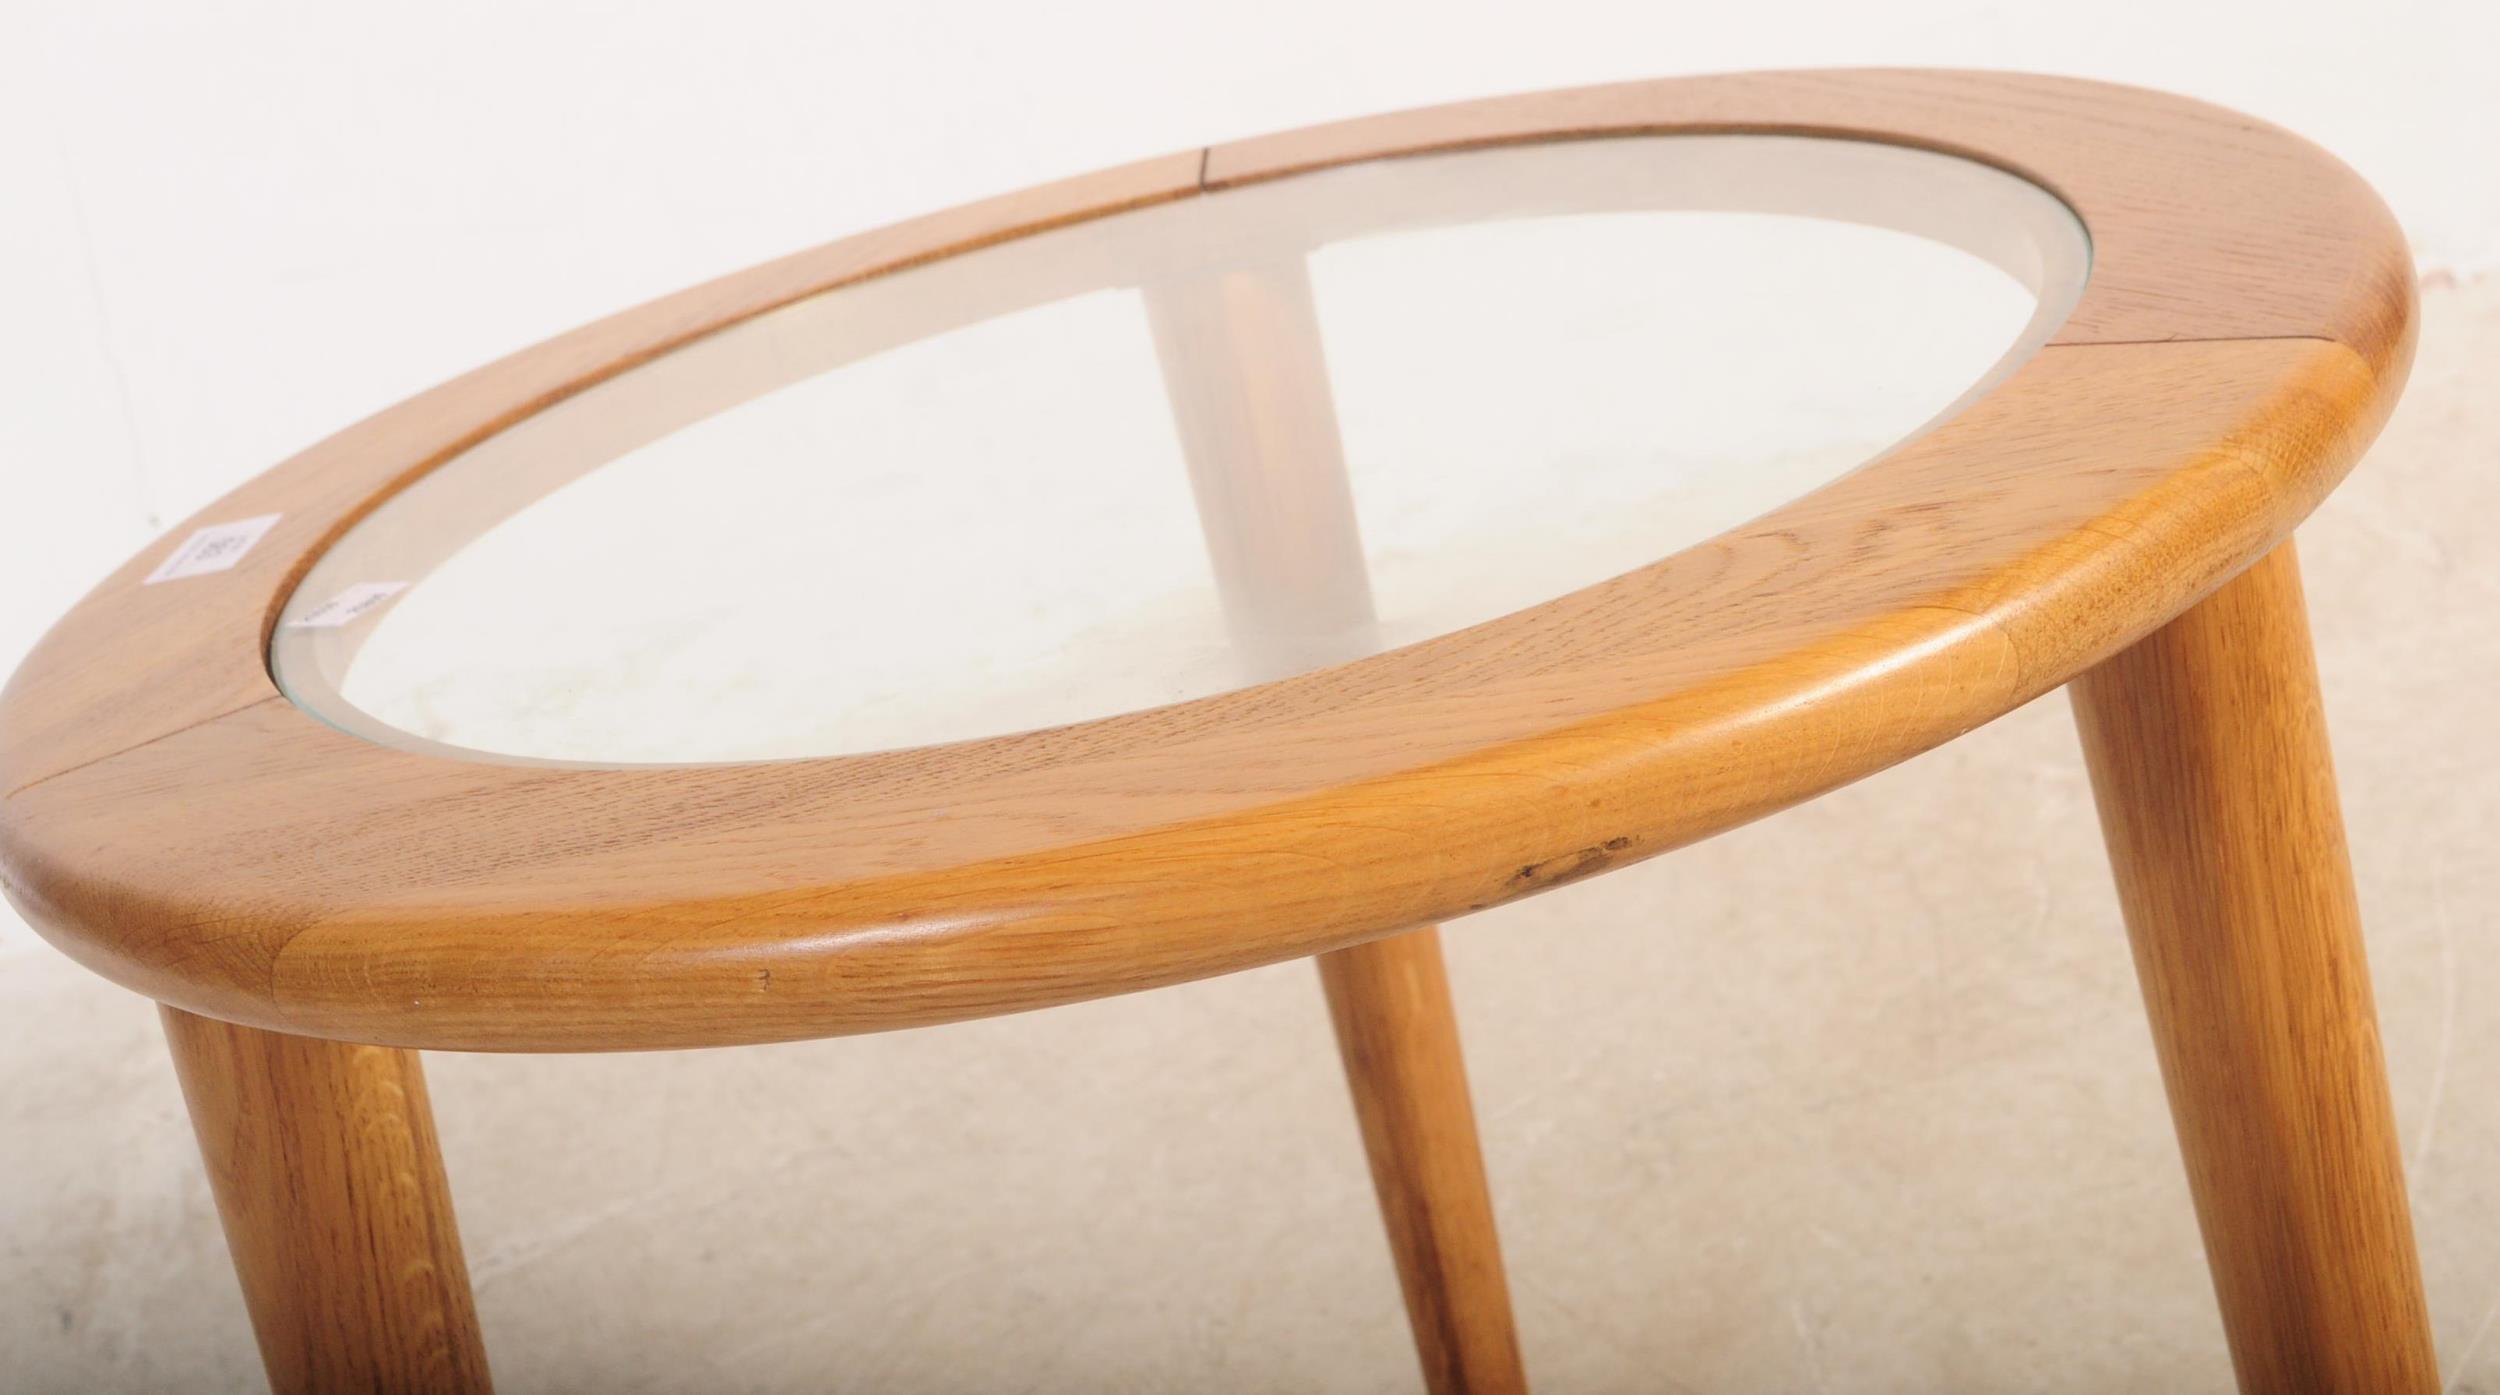 CONTEMPORARY OCCASIONAL GLASS & WOOD CIRCULAR TABLE - Image 3 of 5